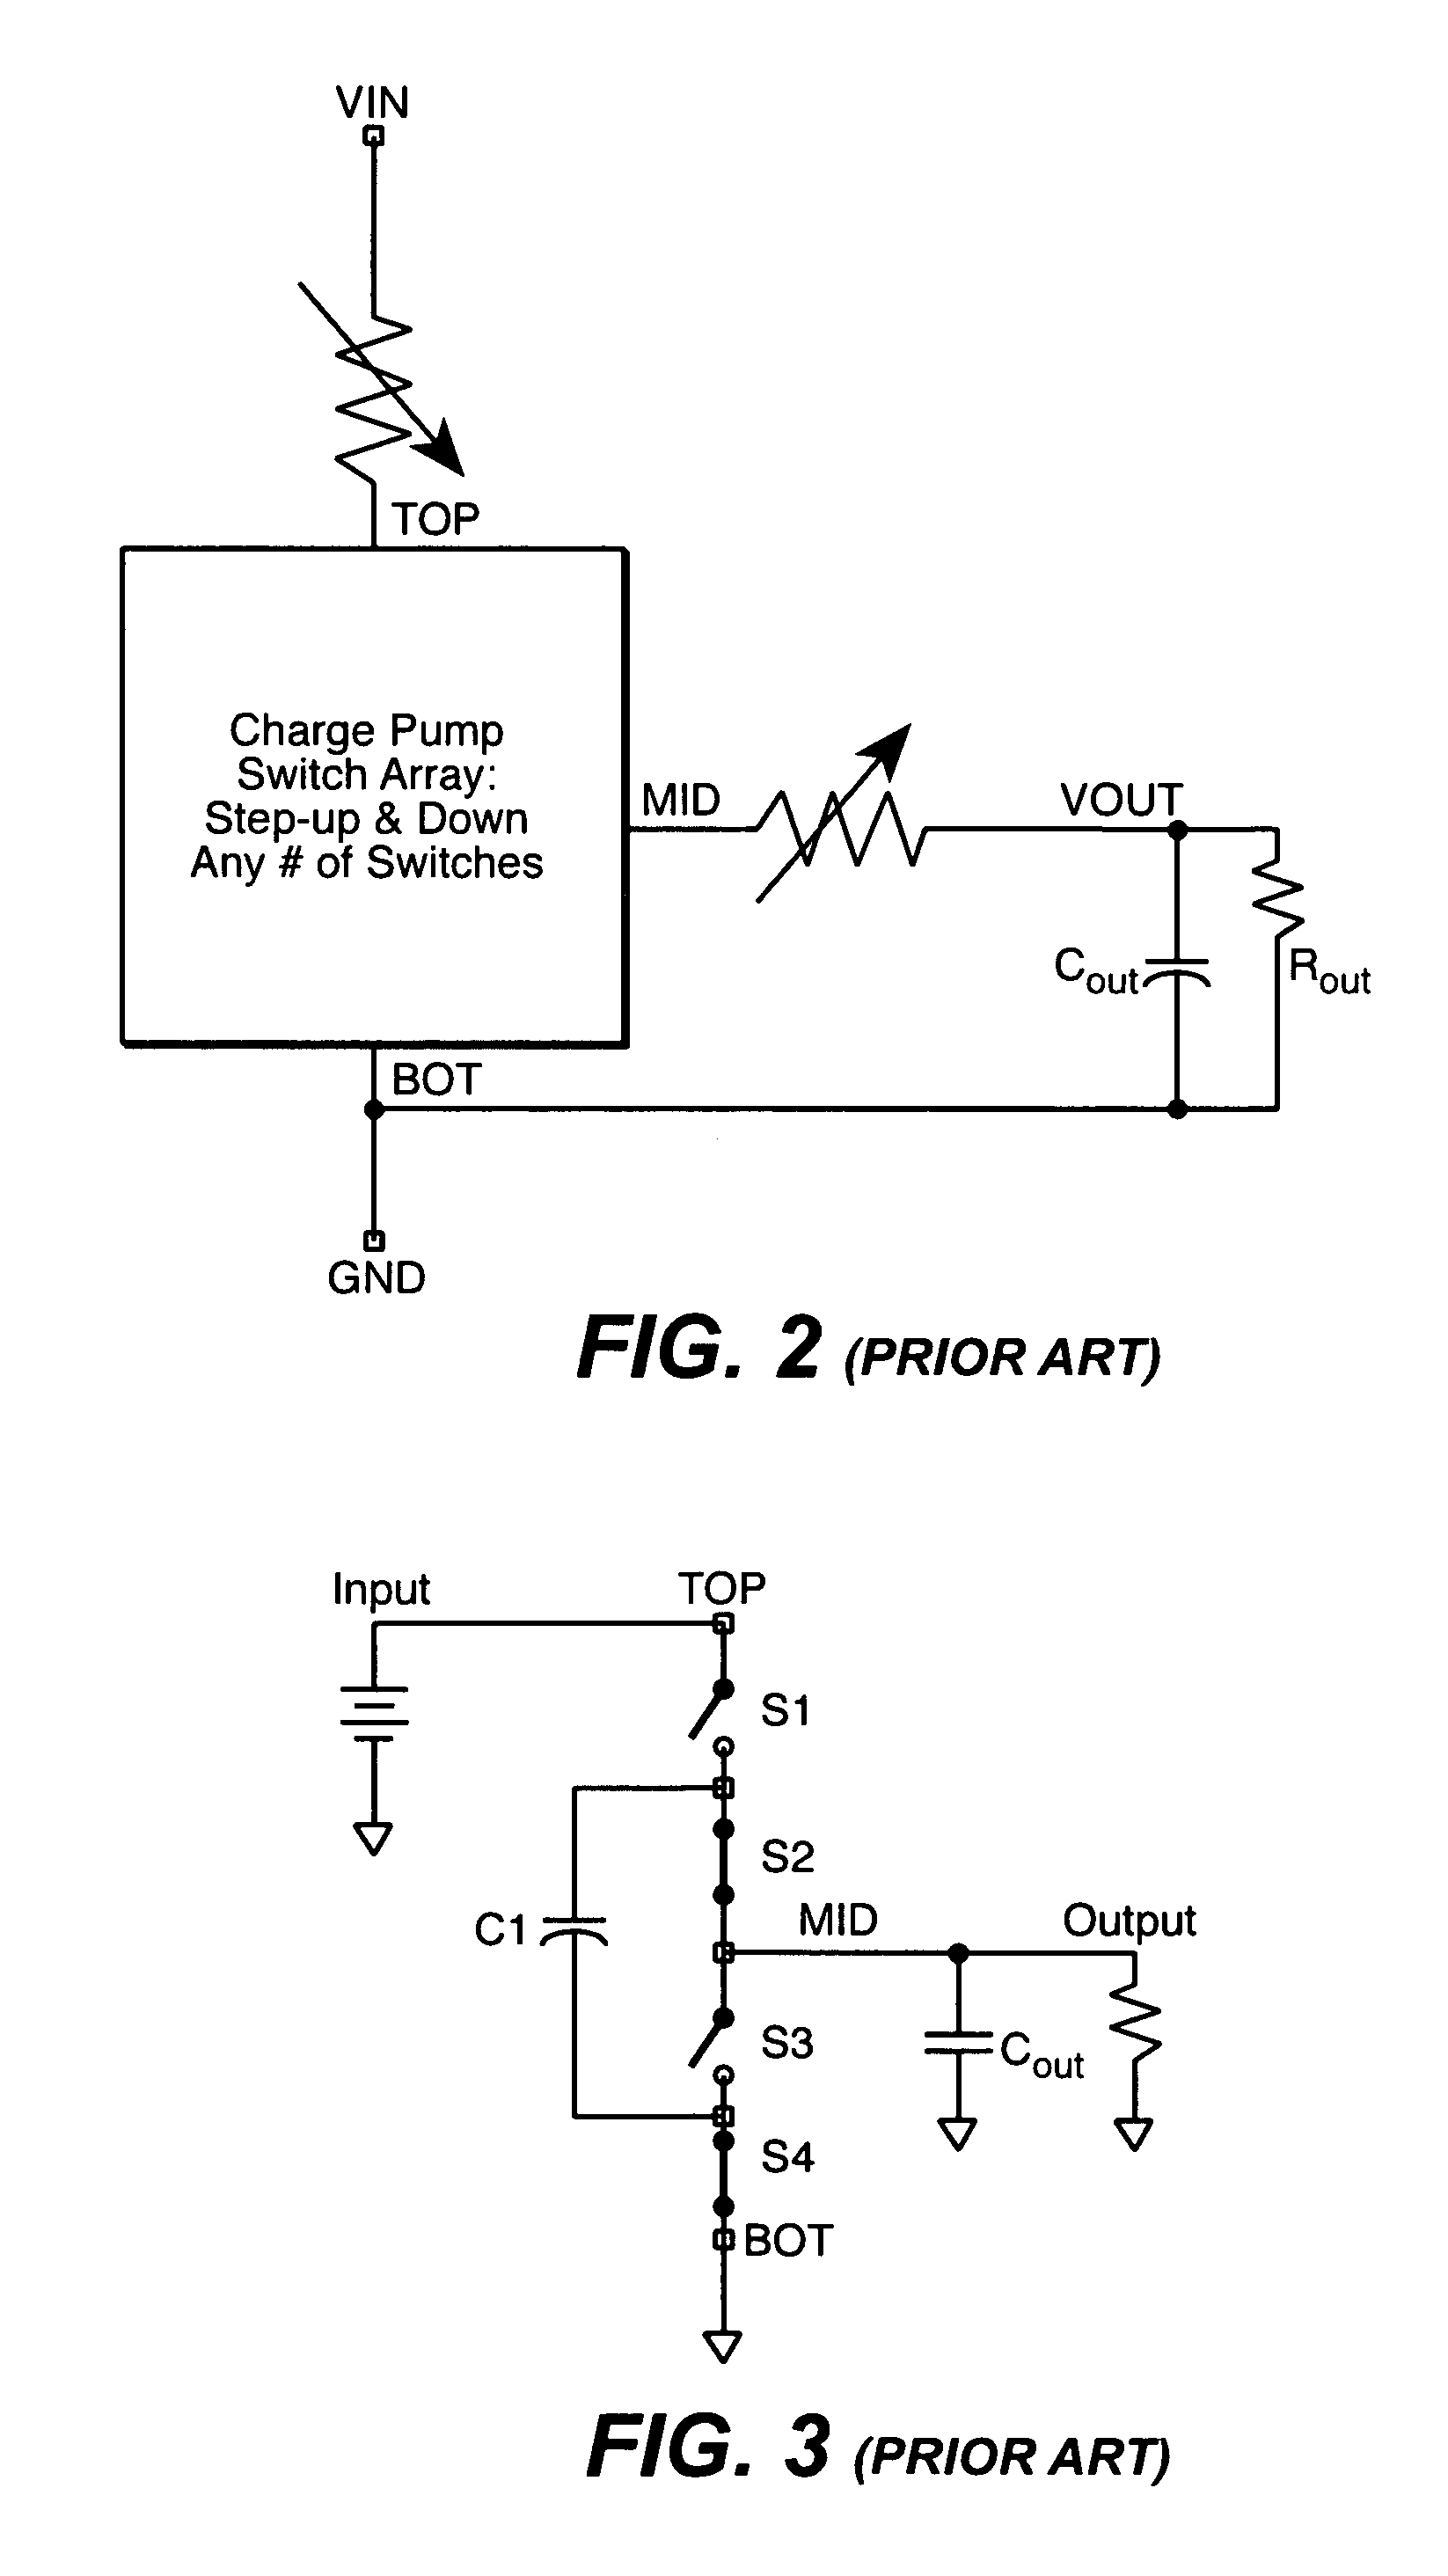 Digital loop for regulating DC/DC converter with segmented switching